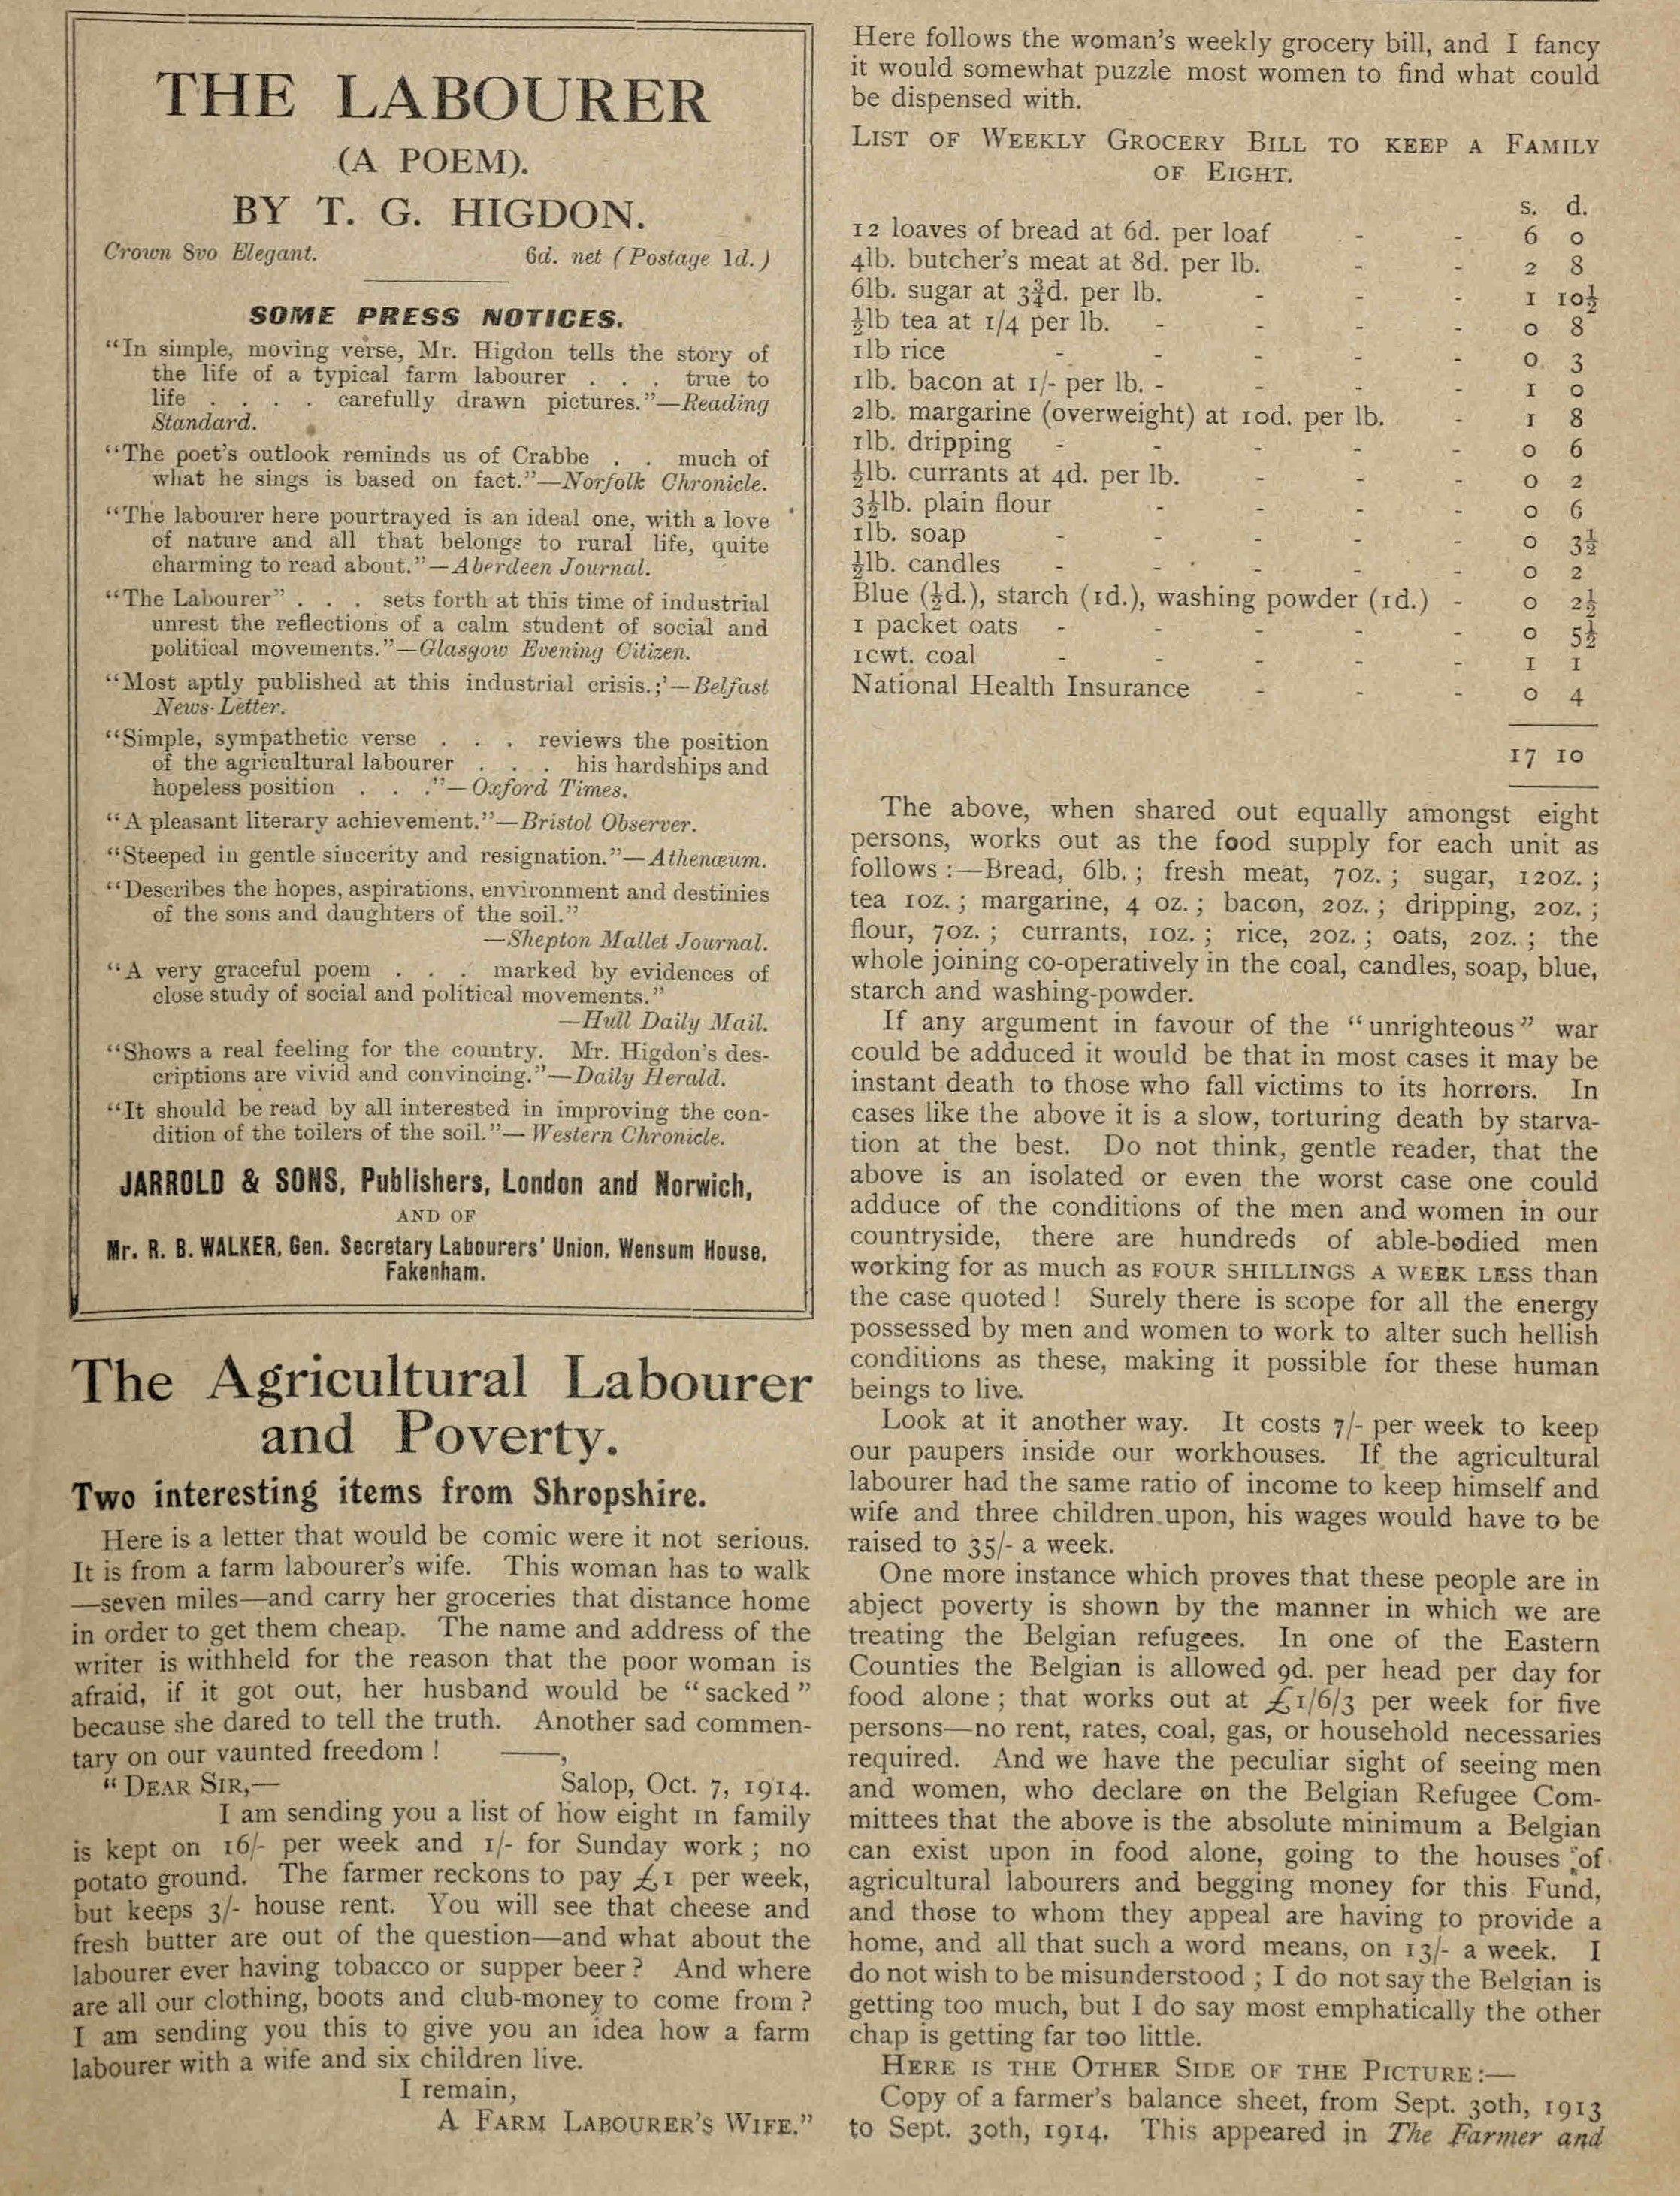 Extract from 'The Labourer, February 1915, including an example of a weekly grocery bill for a family of eight